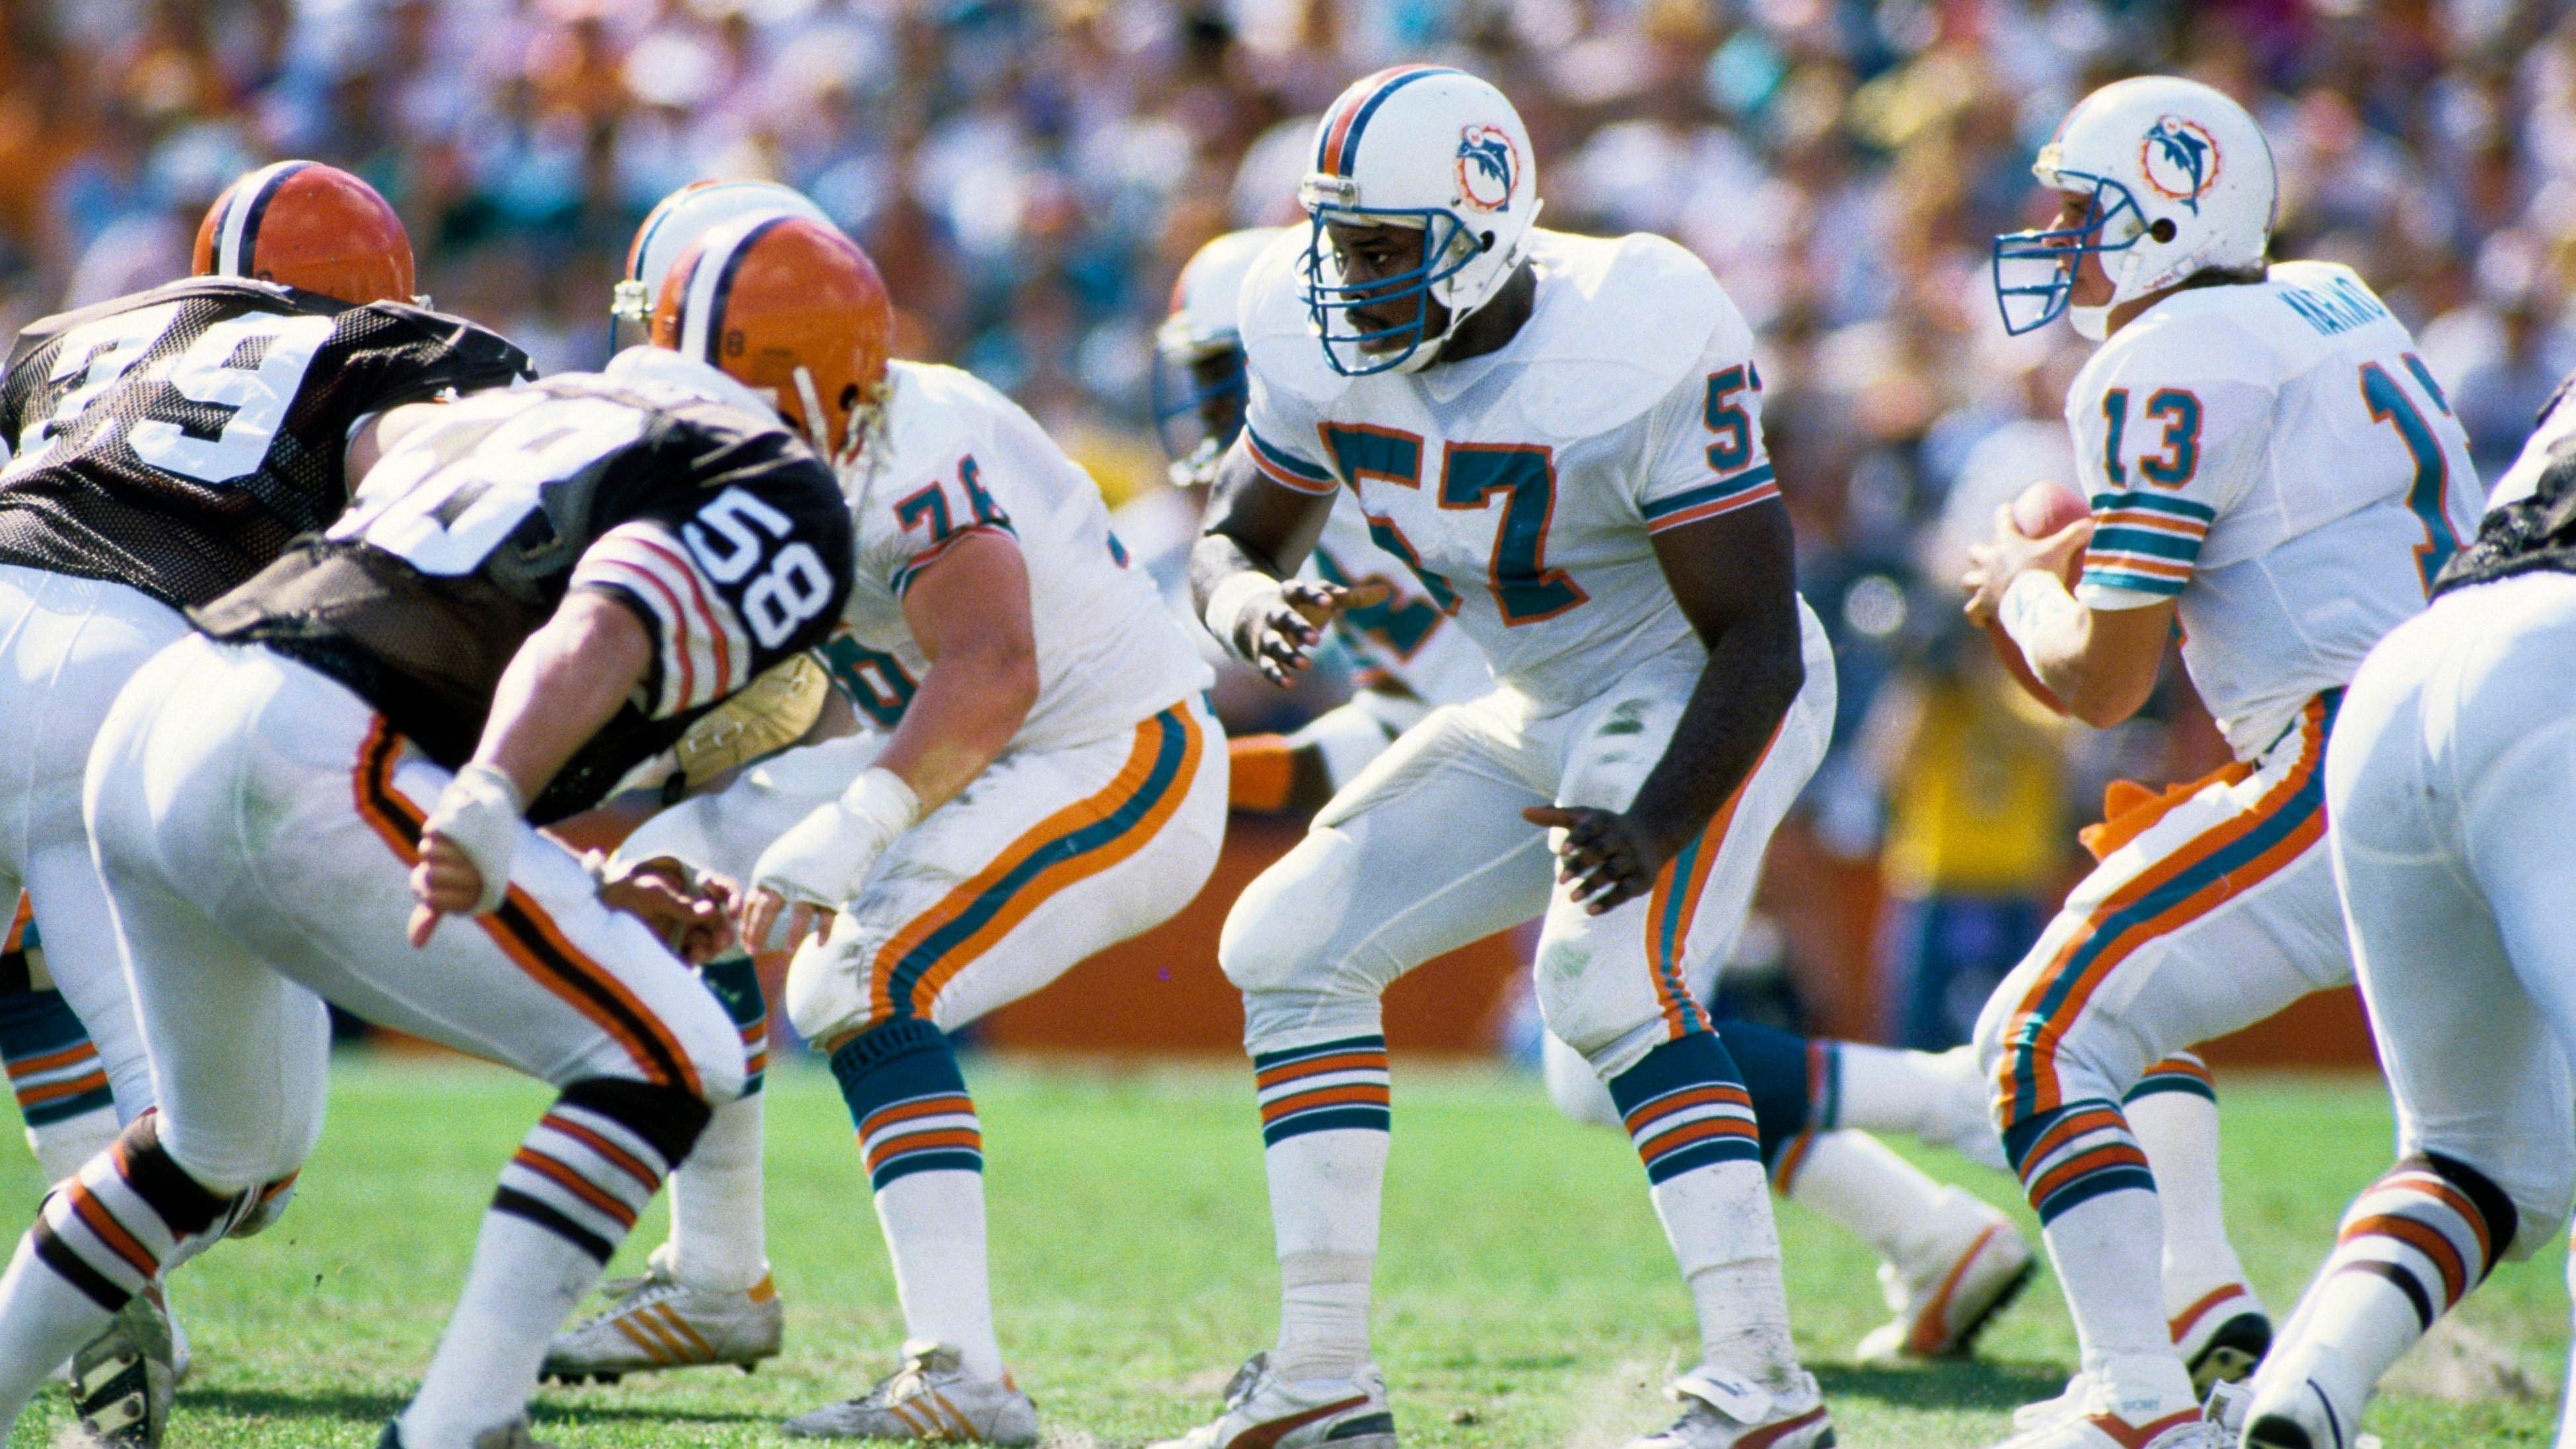 <strong>57: Dwight Stephenson</strong><br>Team: Miami Dolphins<br>Position: Center<br>Erfolge: Pro Football Hall of Famer, viermaliger First Team All-Pro, fünfmaliger Pro Bowler<br>Honorable Mention: Rickey Jackson